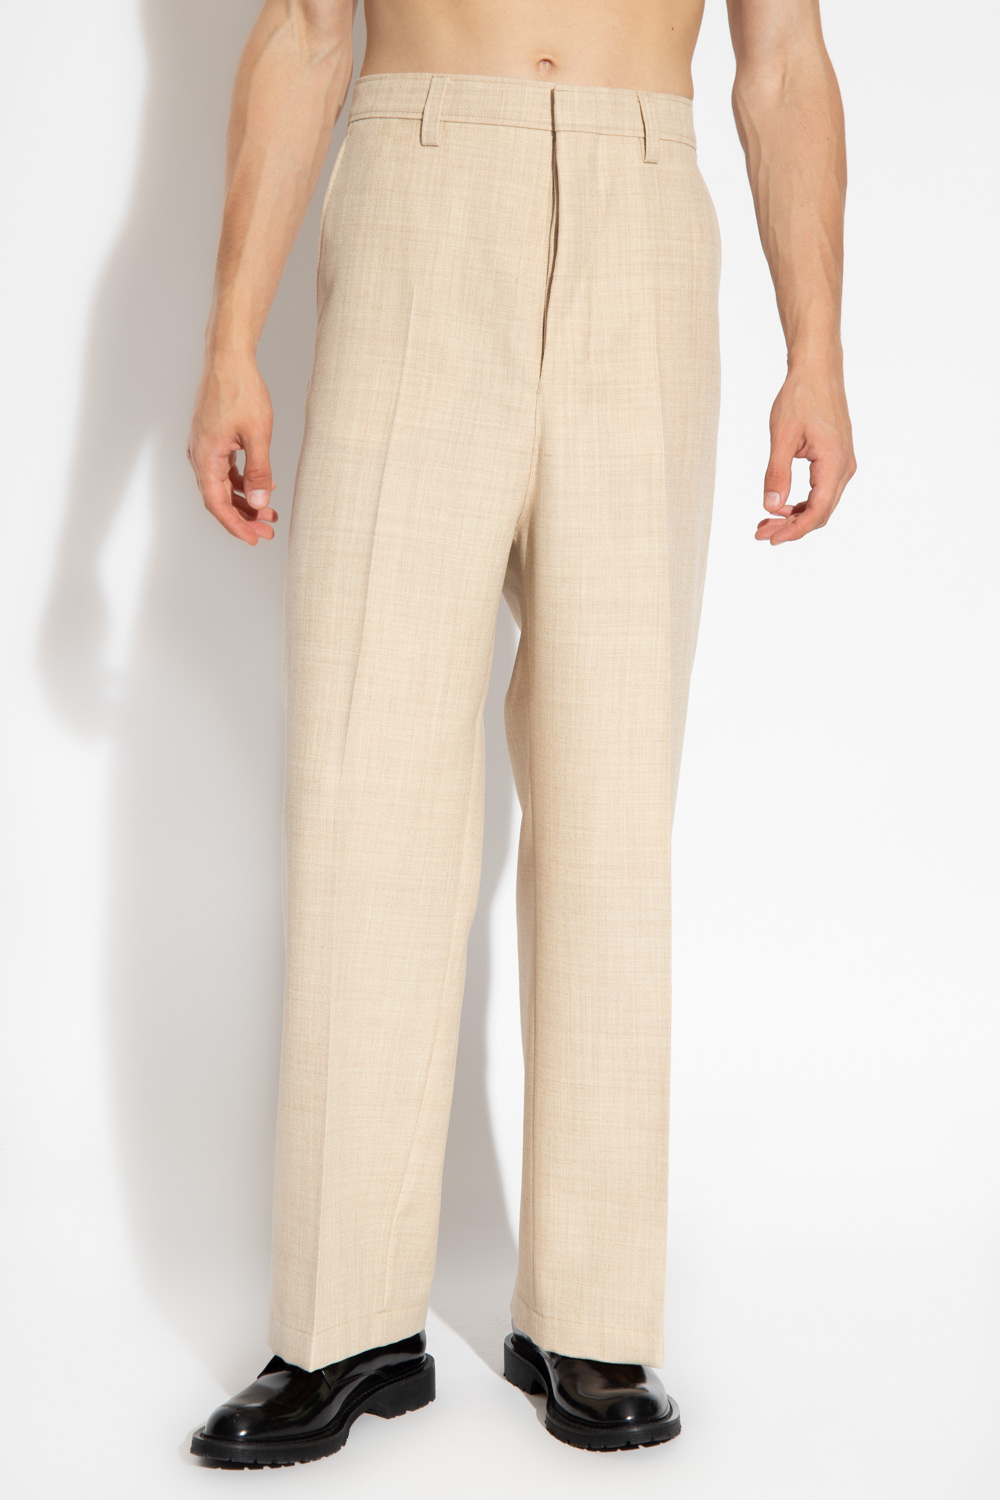 Ami Alexandre Mattiussi Pleat-front disapointing trousers